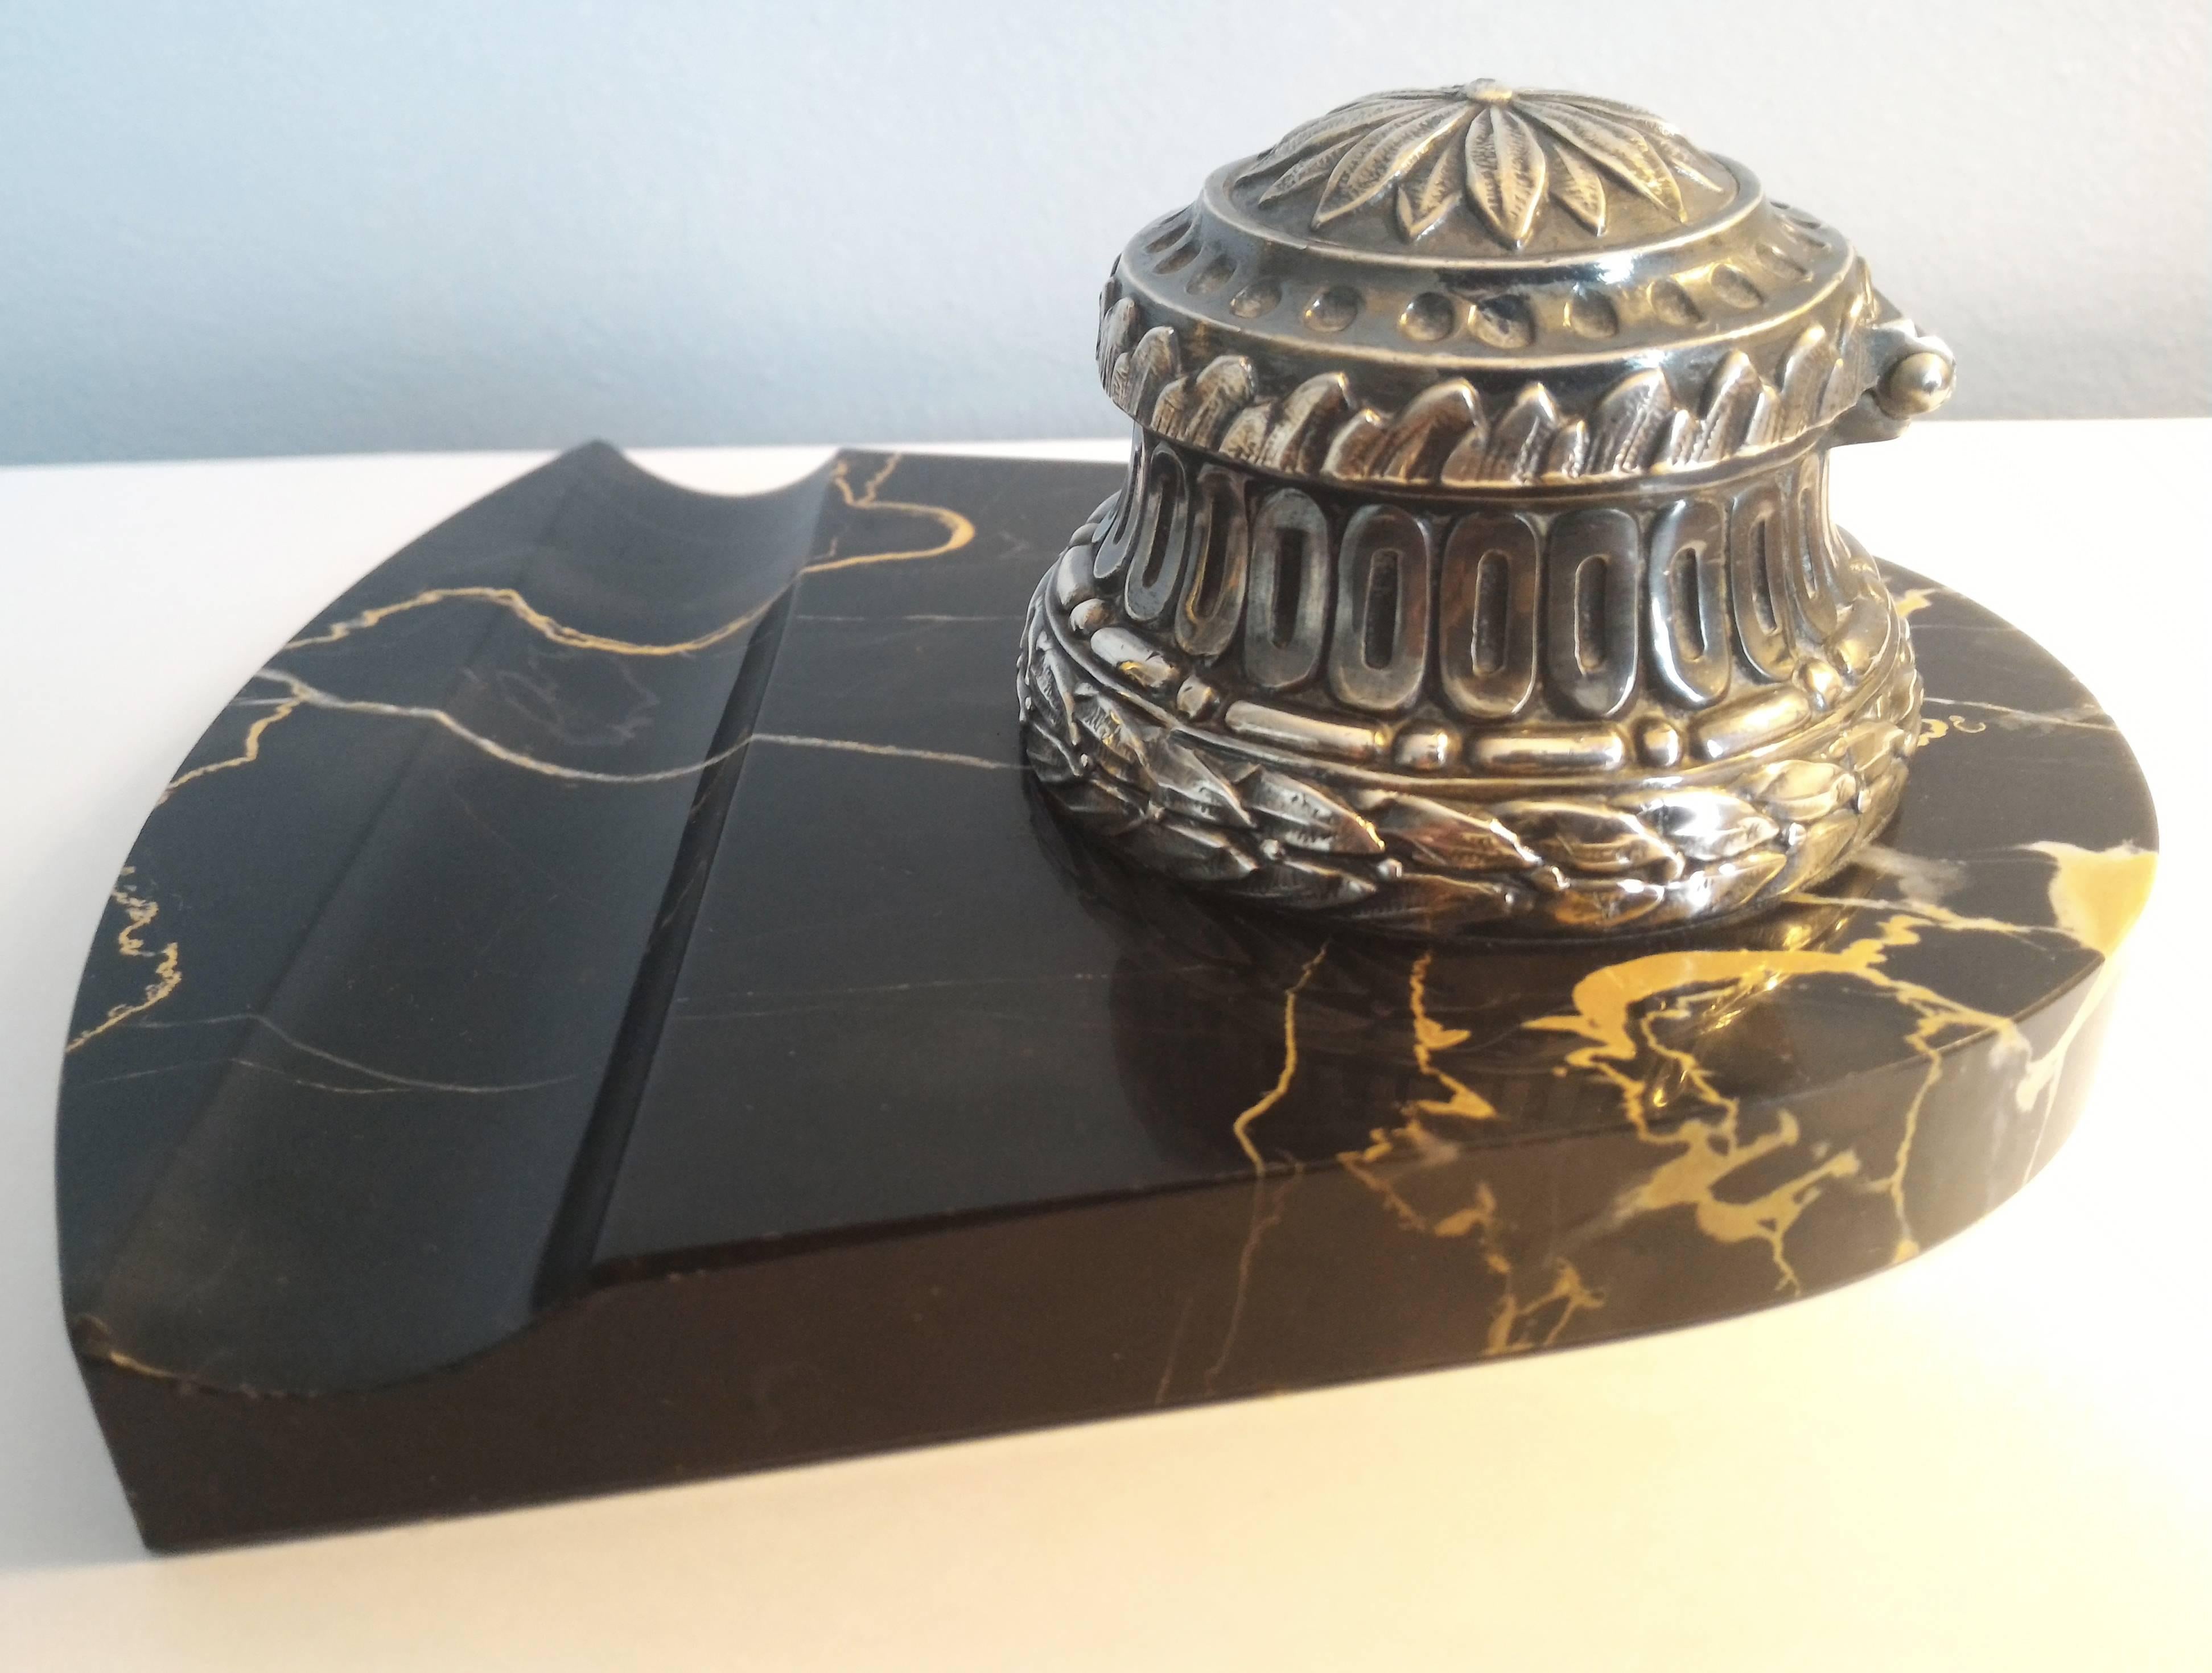 Extremely Chic black and gold portor marble base inkwell portor marble and silver metal Inkstand with two buckets.

Portor marble is a very rare marble quarried in Italy and in Corsica and sometimes found in France, but very sparingly. It is known